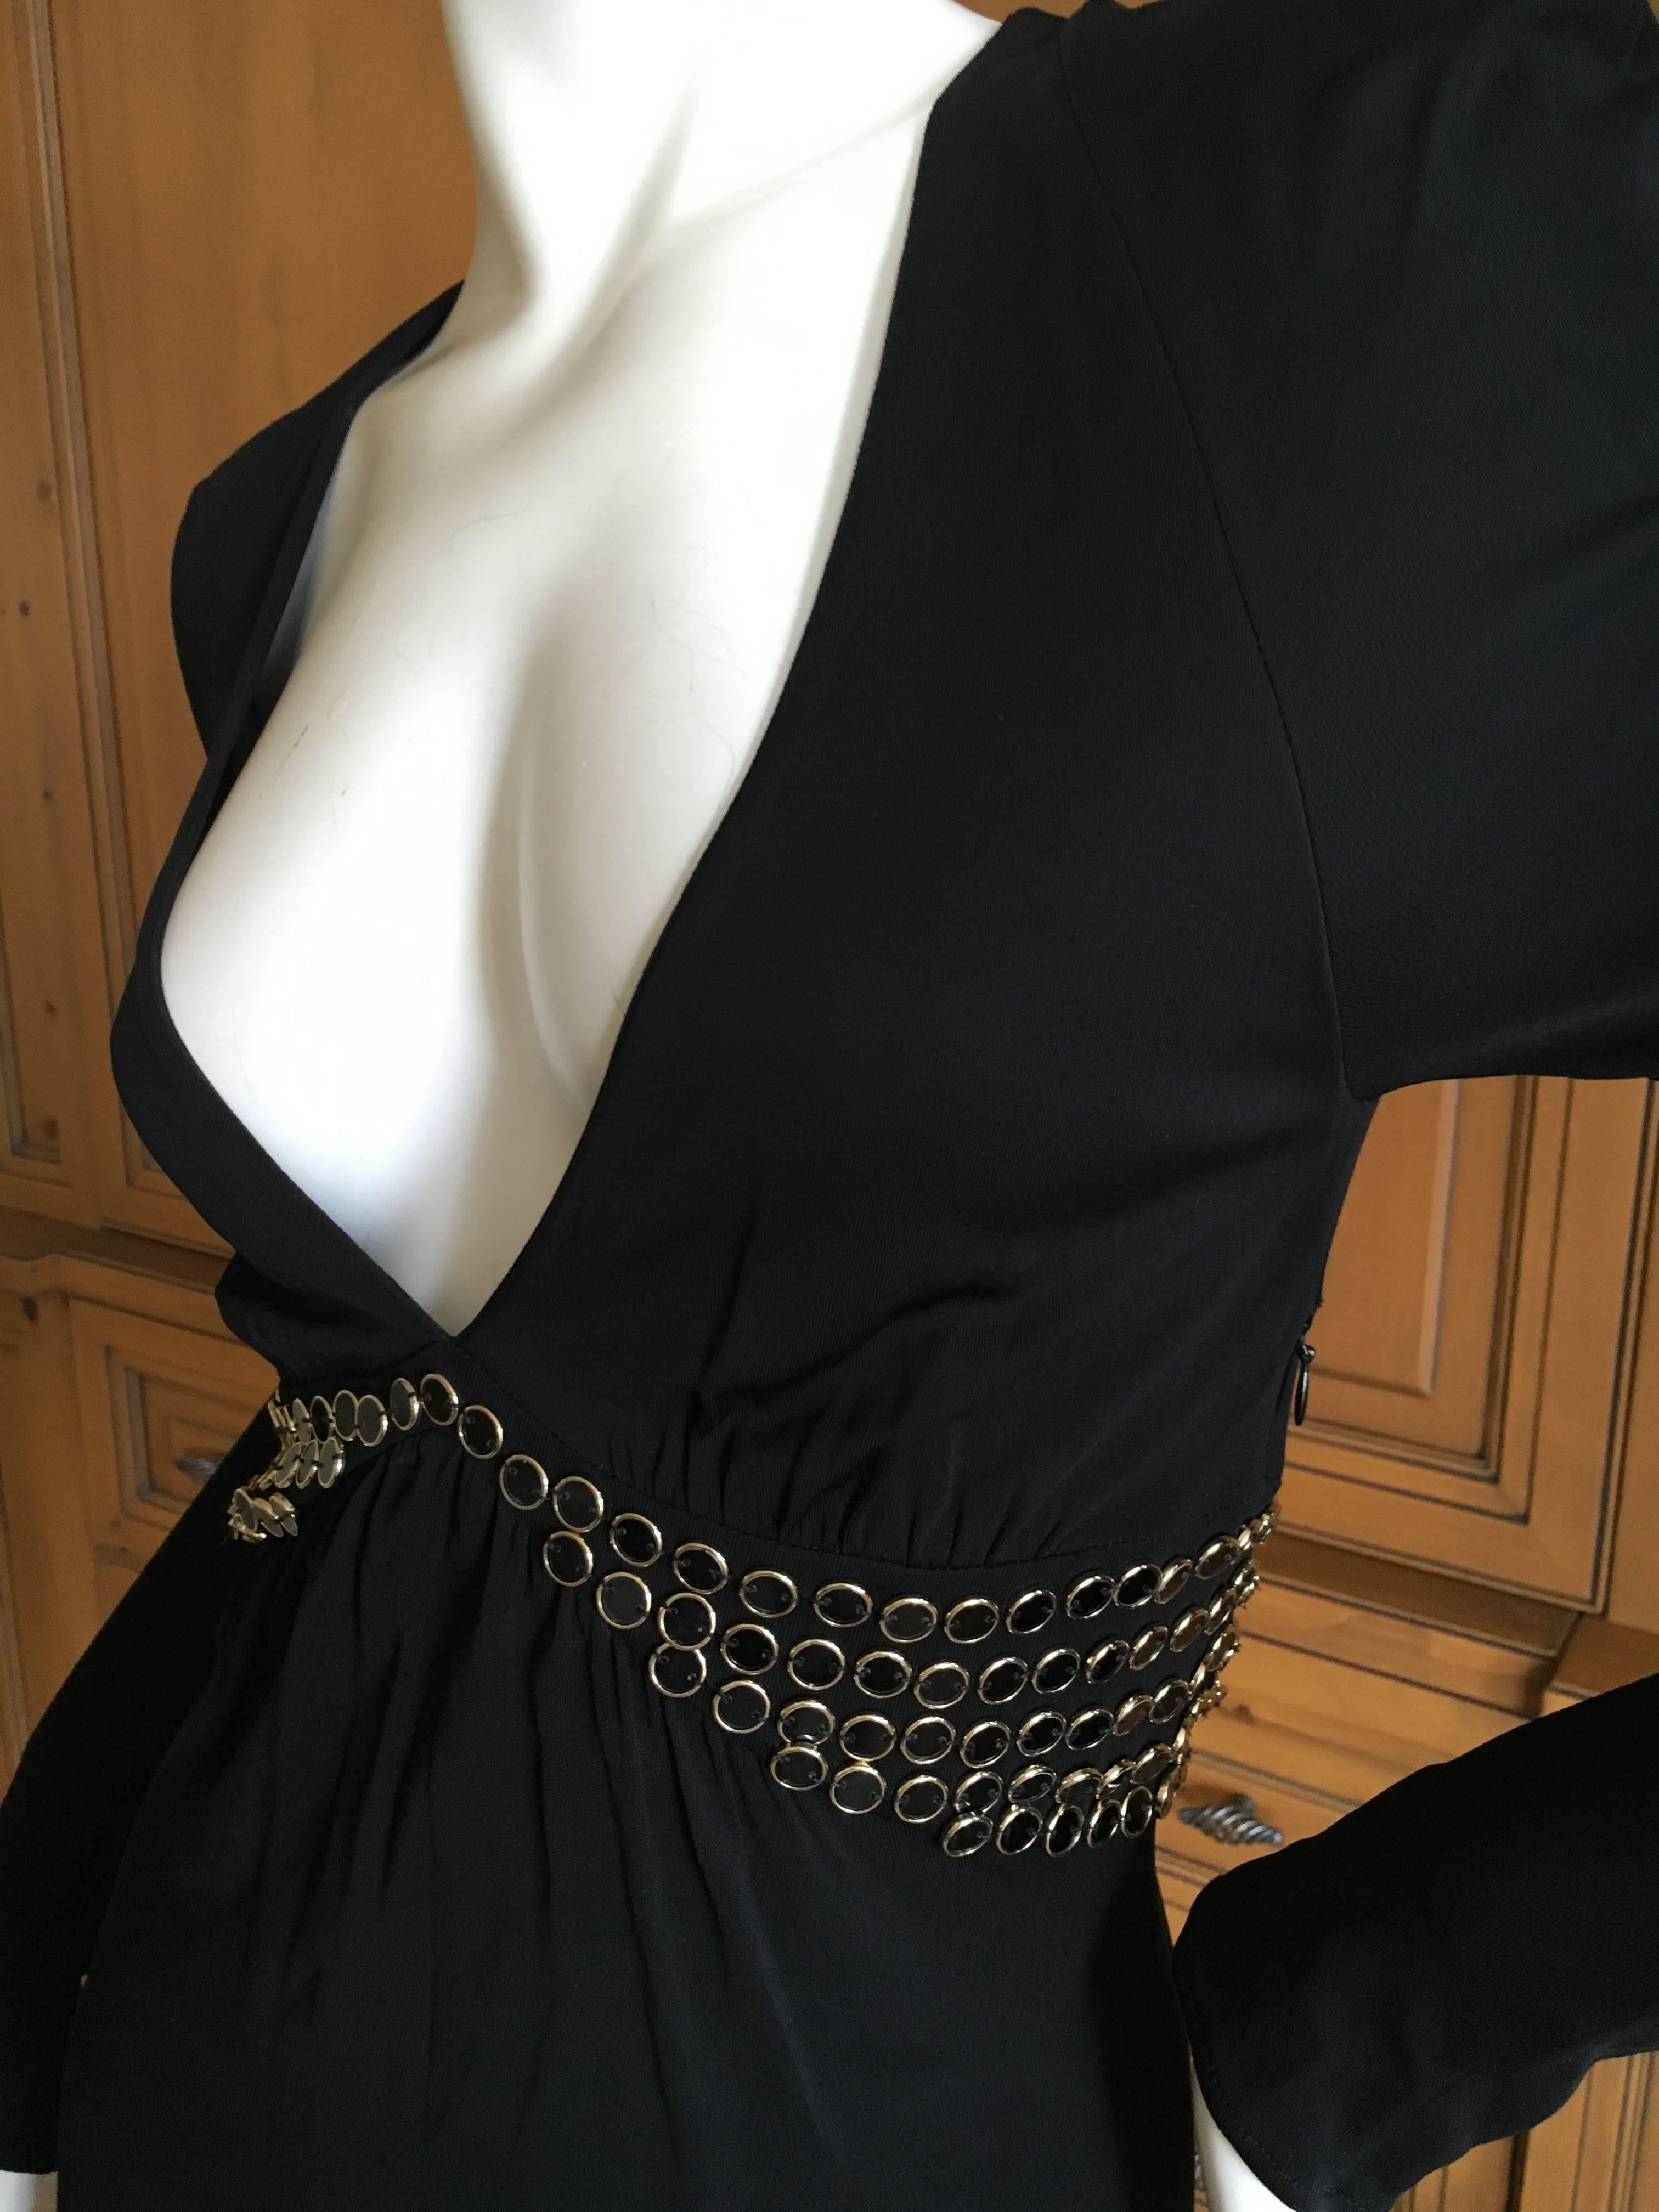 Gucci Low Cut Embellished Little Black Dress by Tom Ford For Sale 1